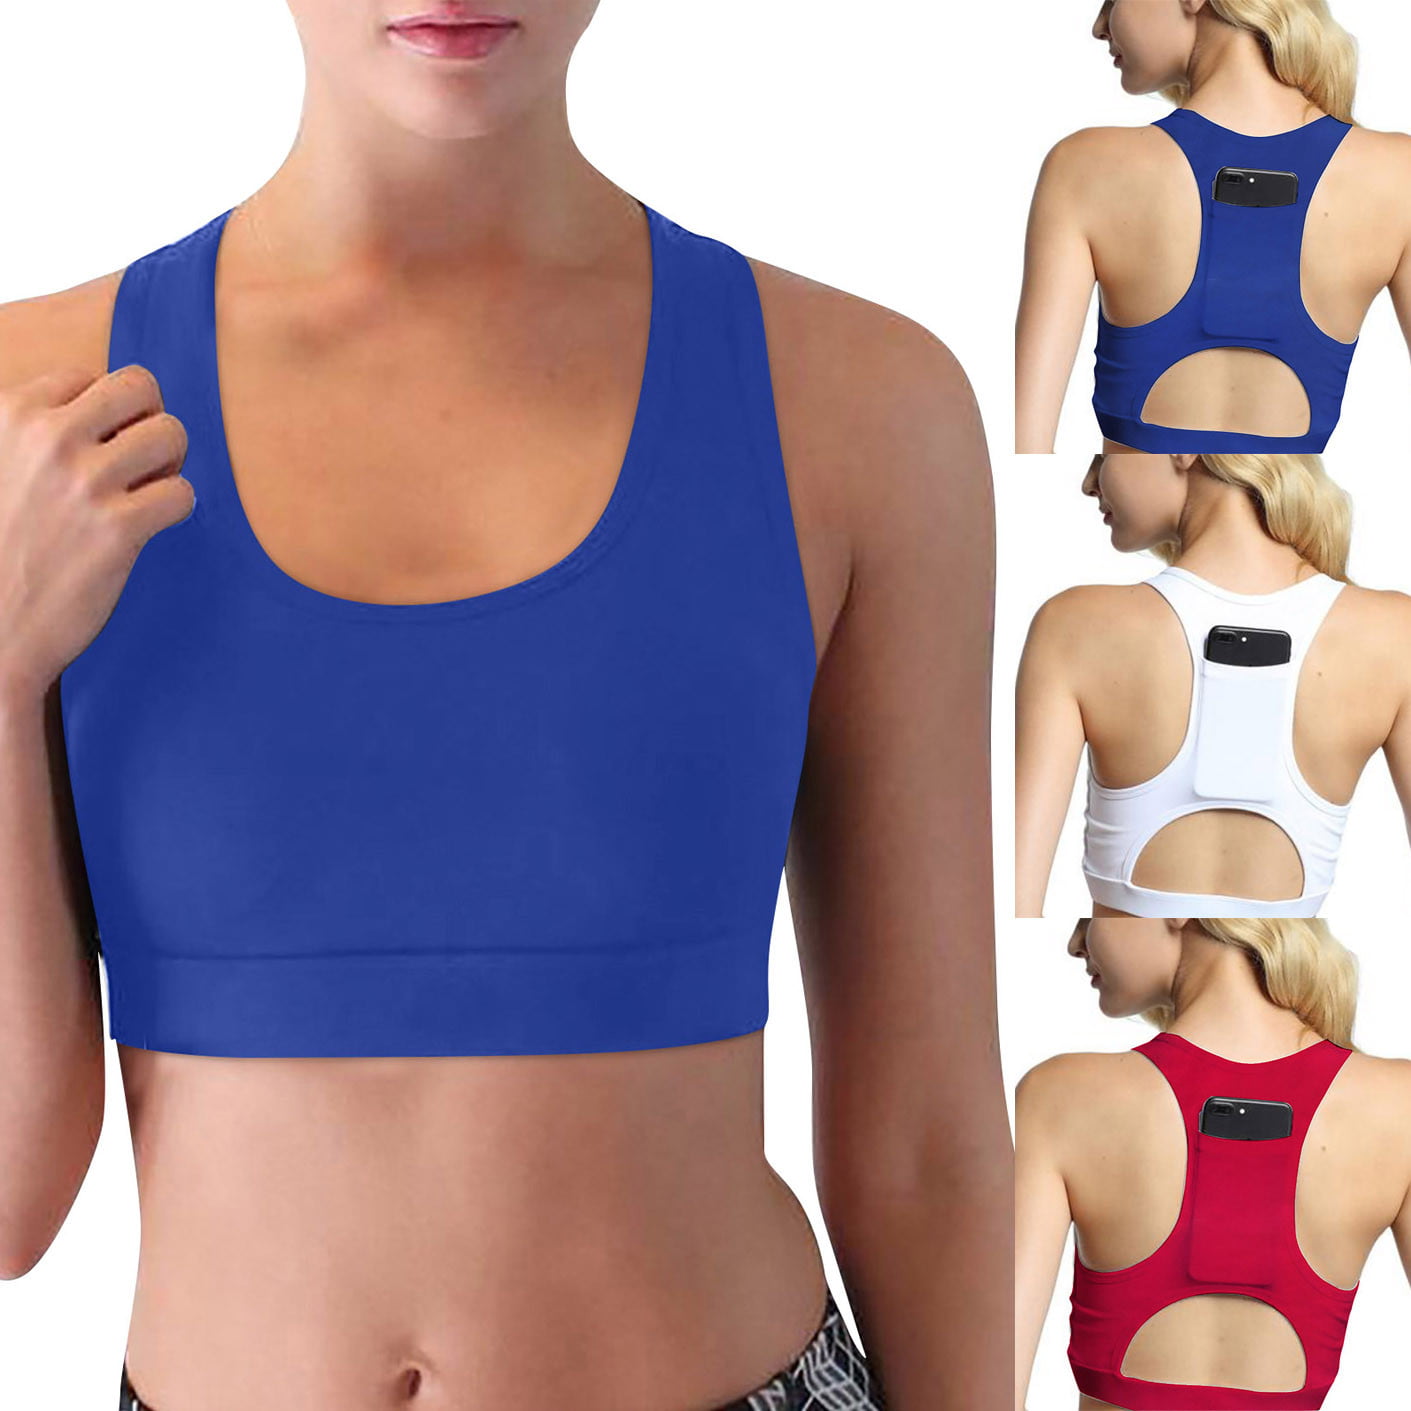 Double Sided Kalyani Sports Bra For Yoga, Running, And Fitness Shockproof  And Breathable With Heart Beauty Back Support Ideal For Athletic Activities  And Gathering Clothes From Luyogasports, $18.6